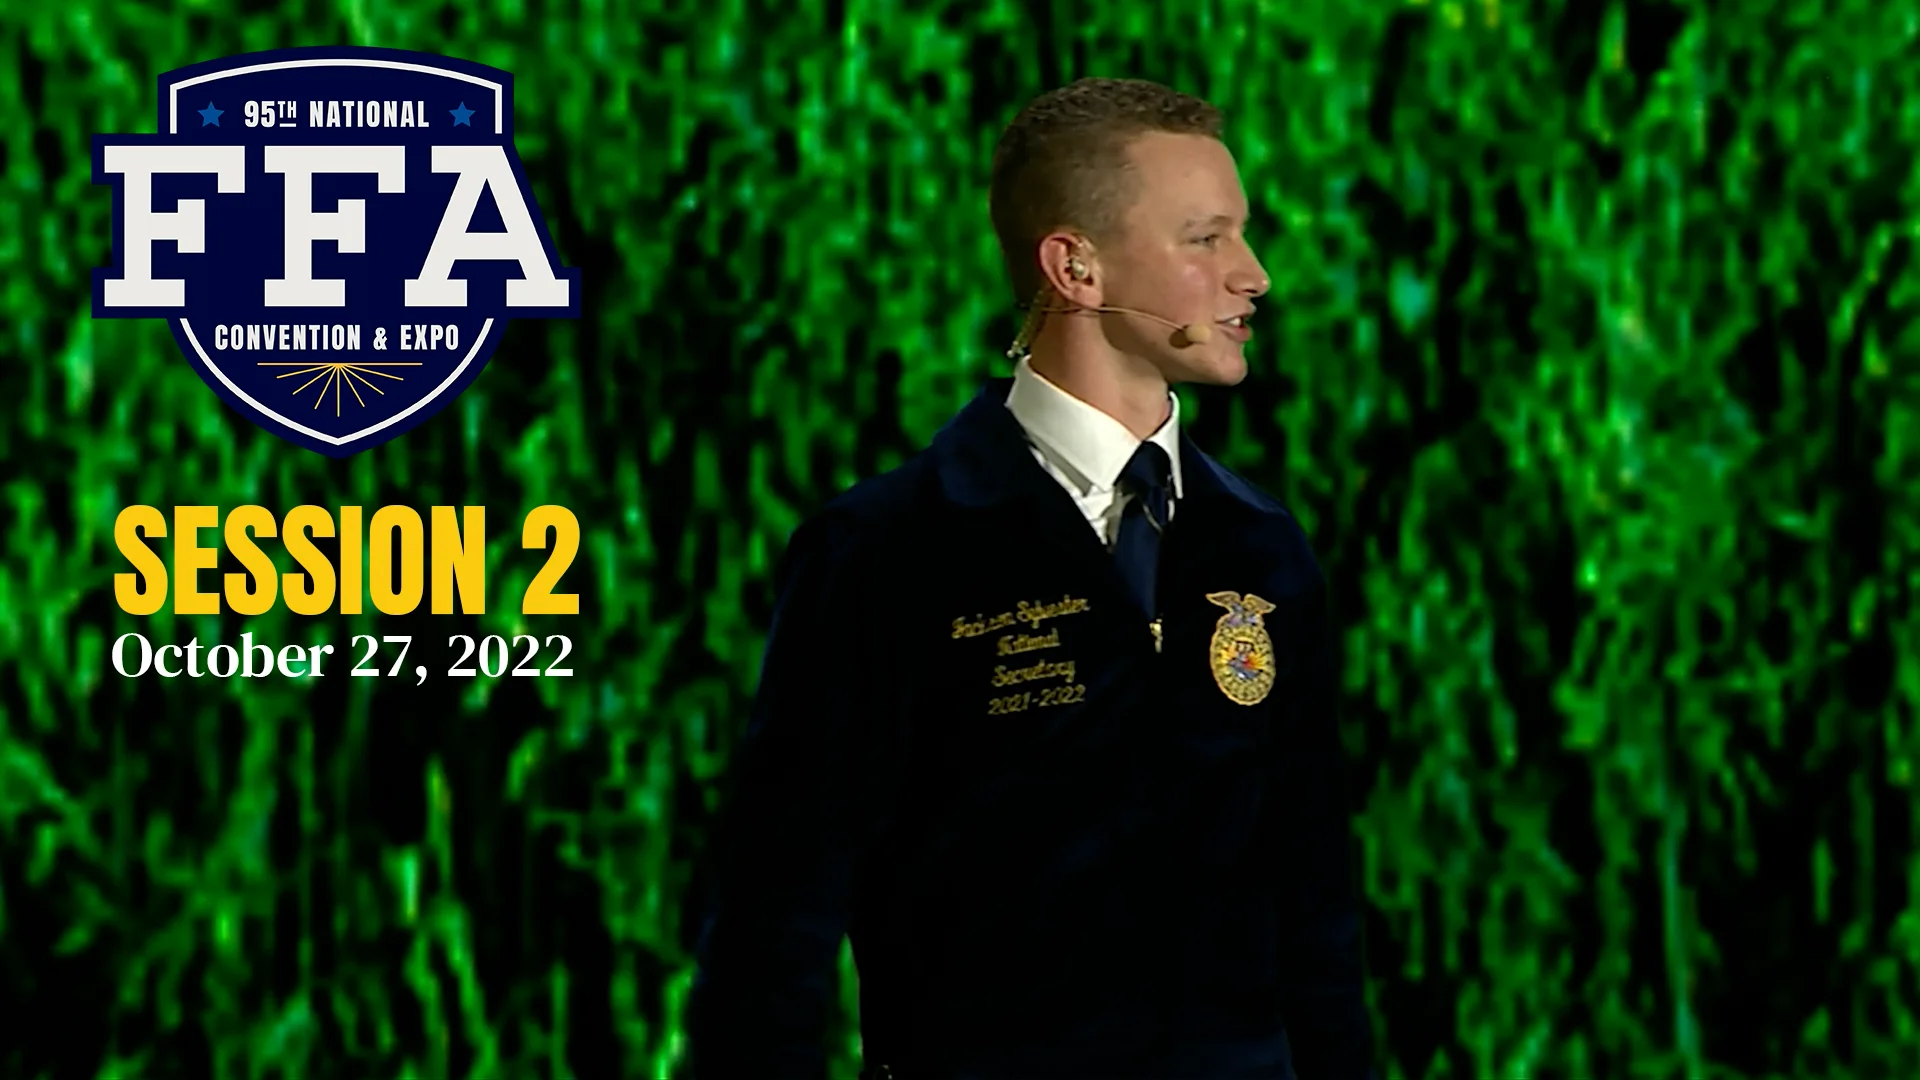 What Does FFA Stand For? on Vimeo